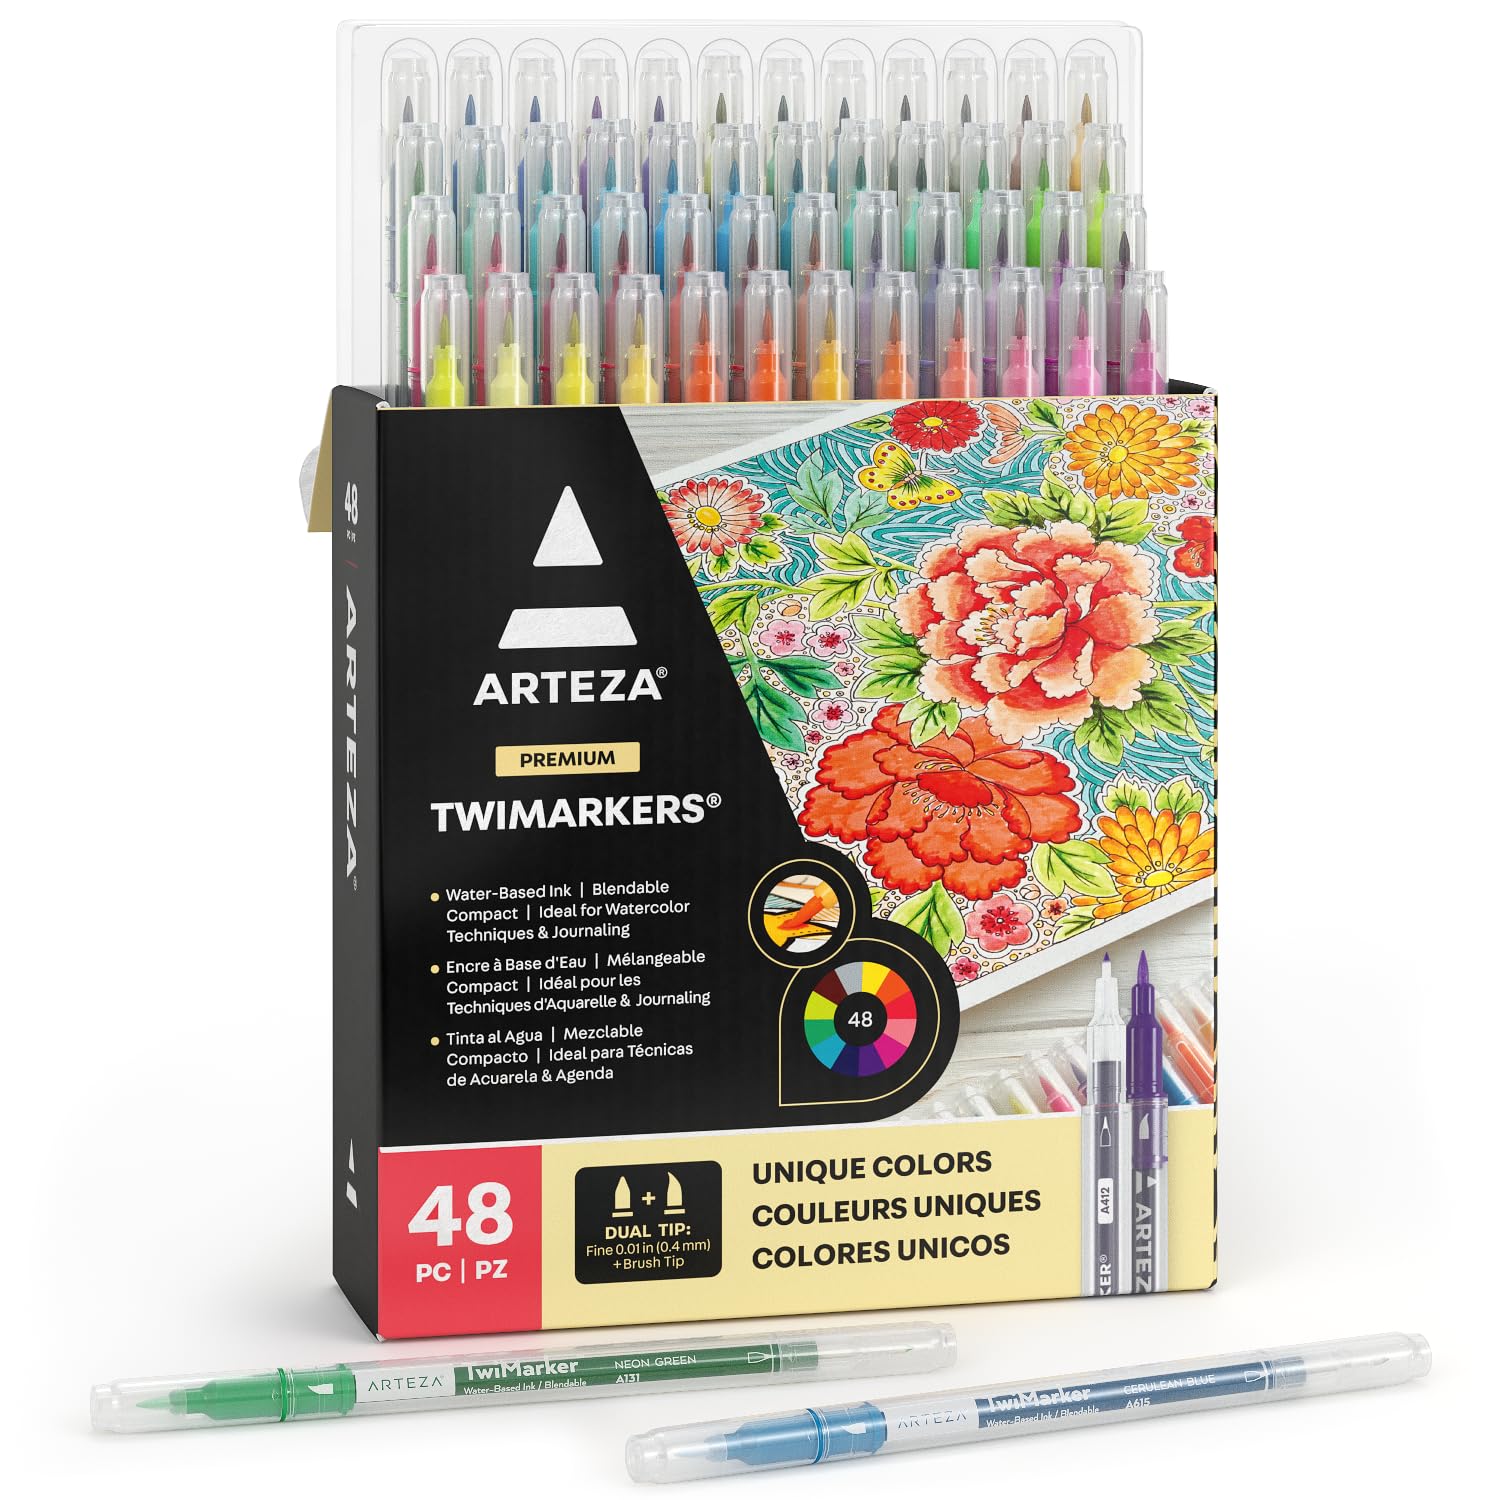 ARTEZA Dual Brush Pens, Set of 48 Colors, Art Markers with Fine & Brush Tips, Twimarkers for Coloring, Calligraphy, Sketching, Doodling, Art Supplies for Drawing, Journaling, Hand Lettering